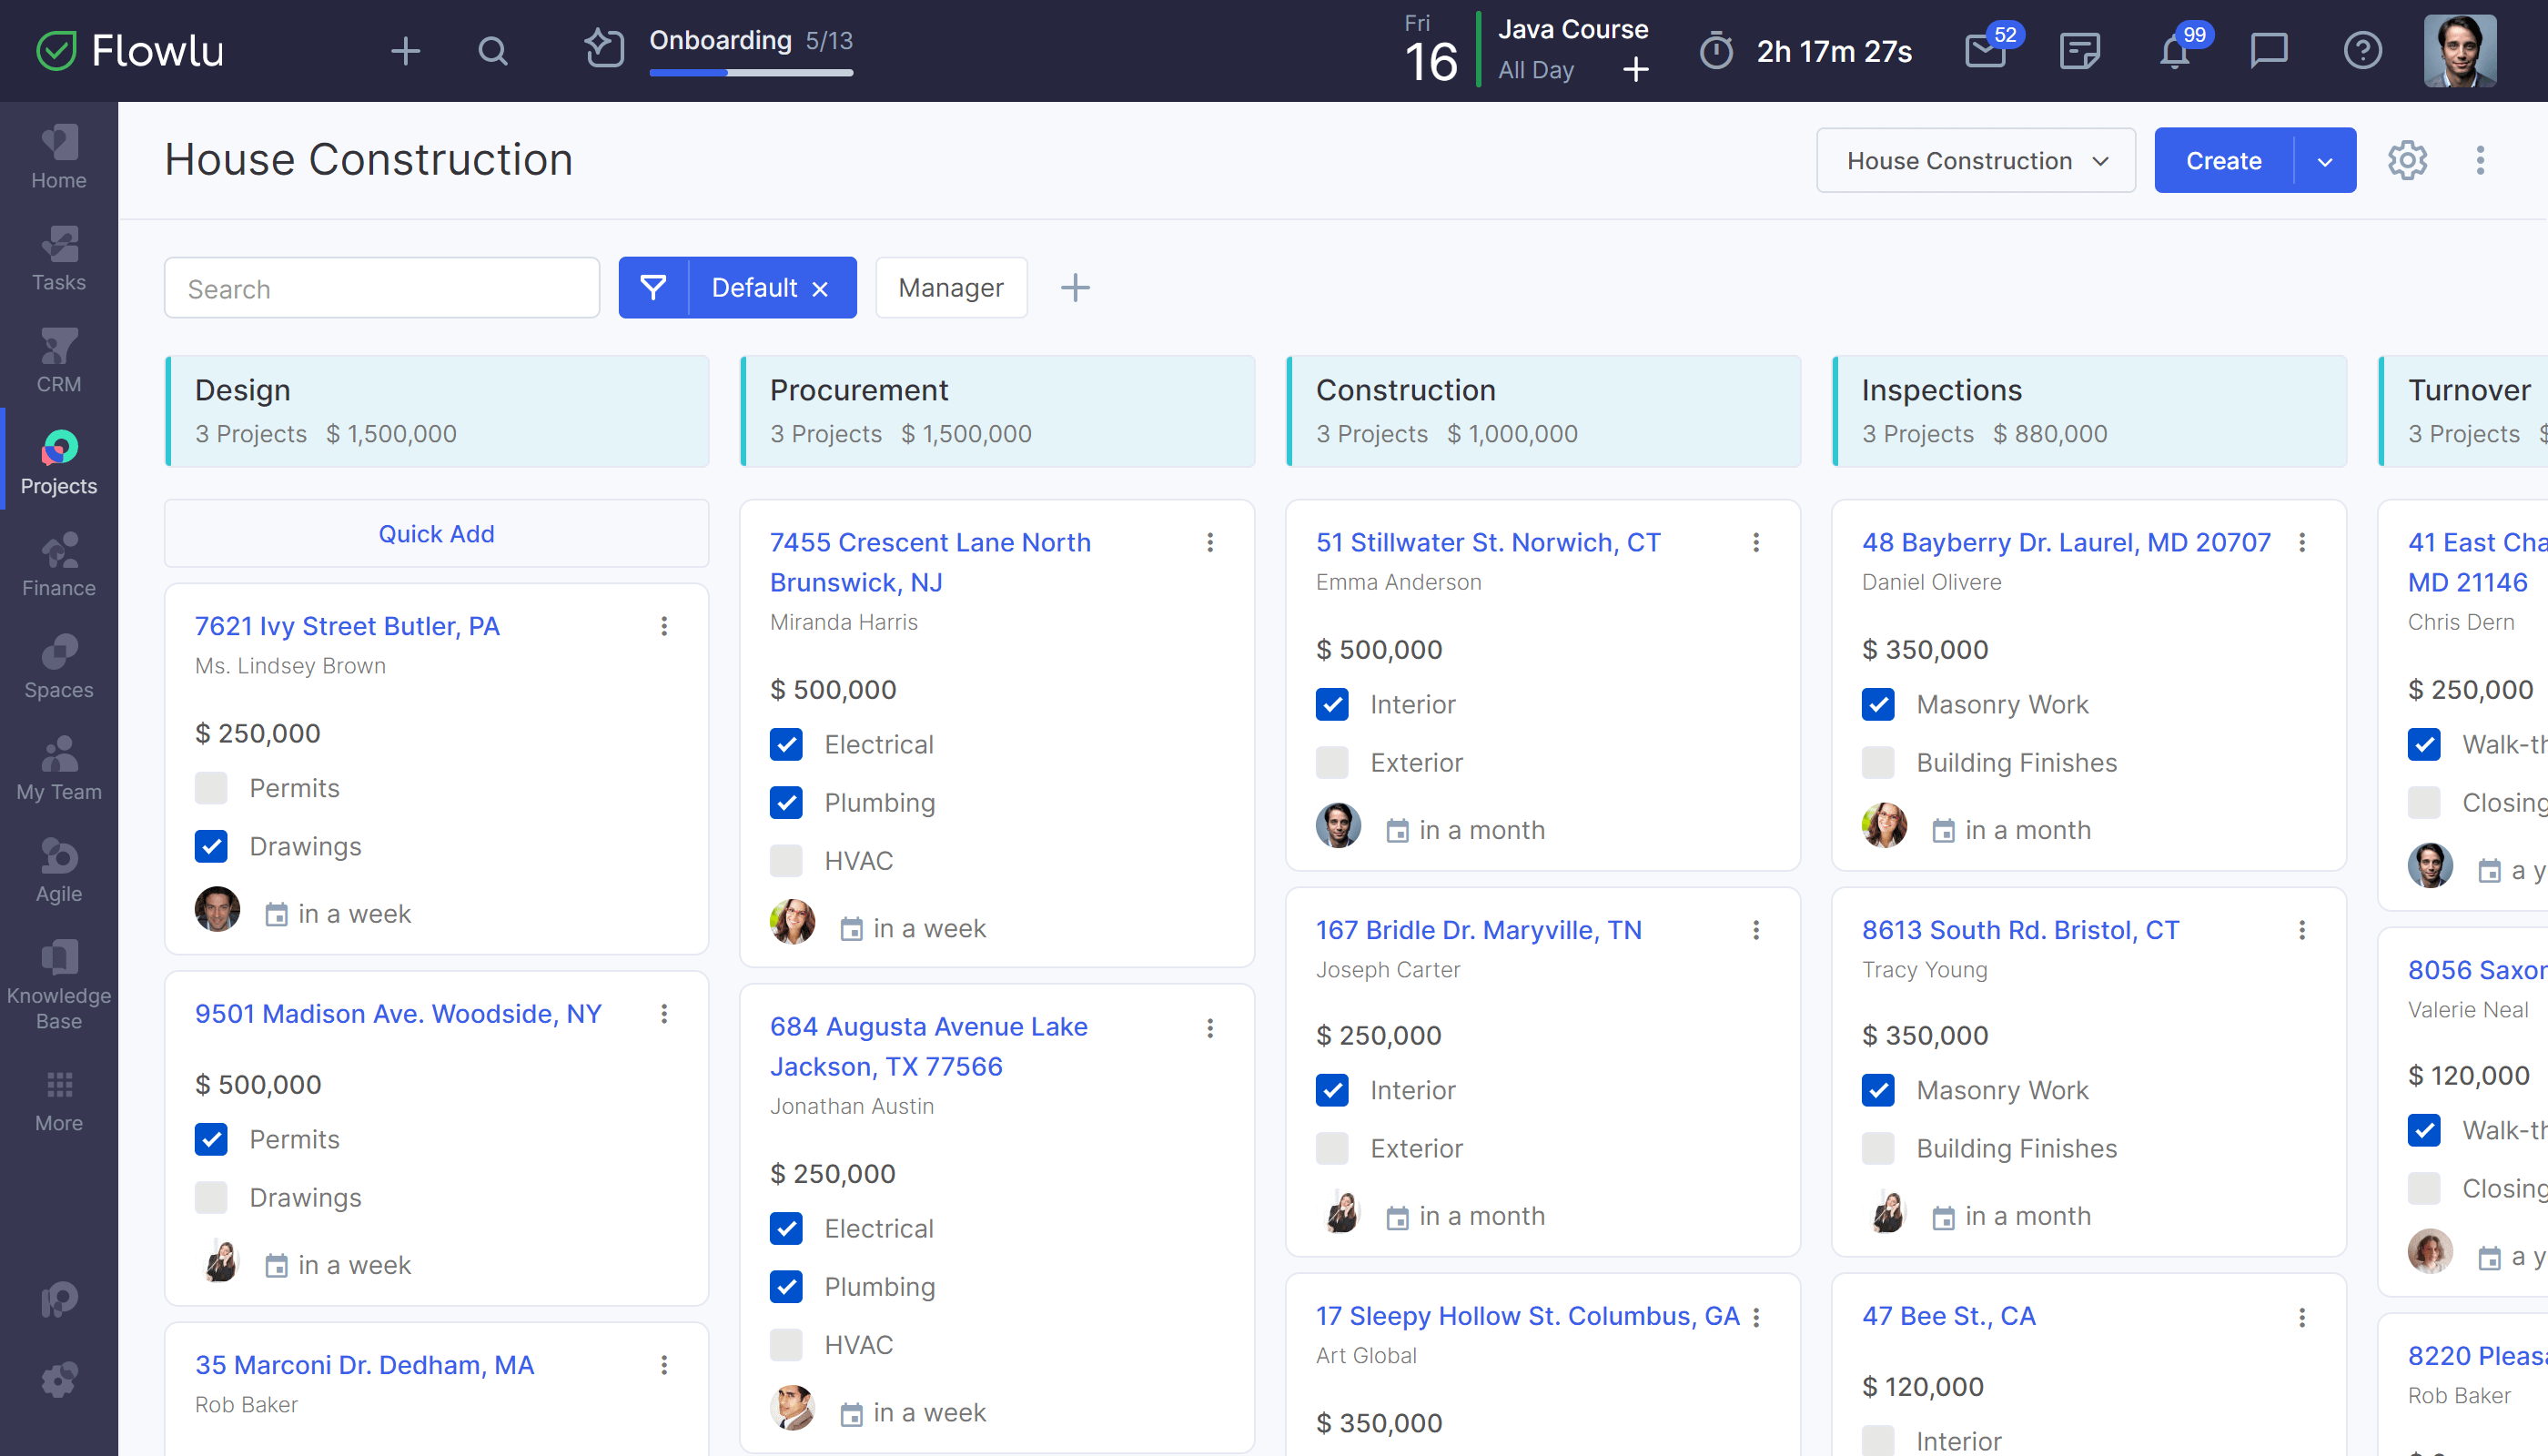 Flowlu - Get all the essential tools to run your business in one place